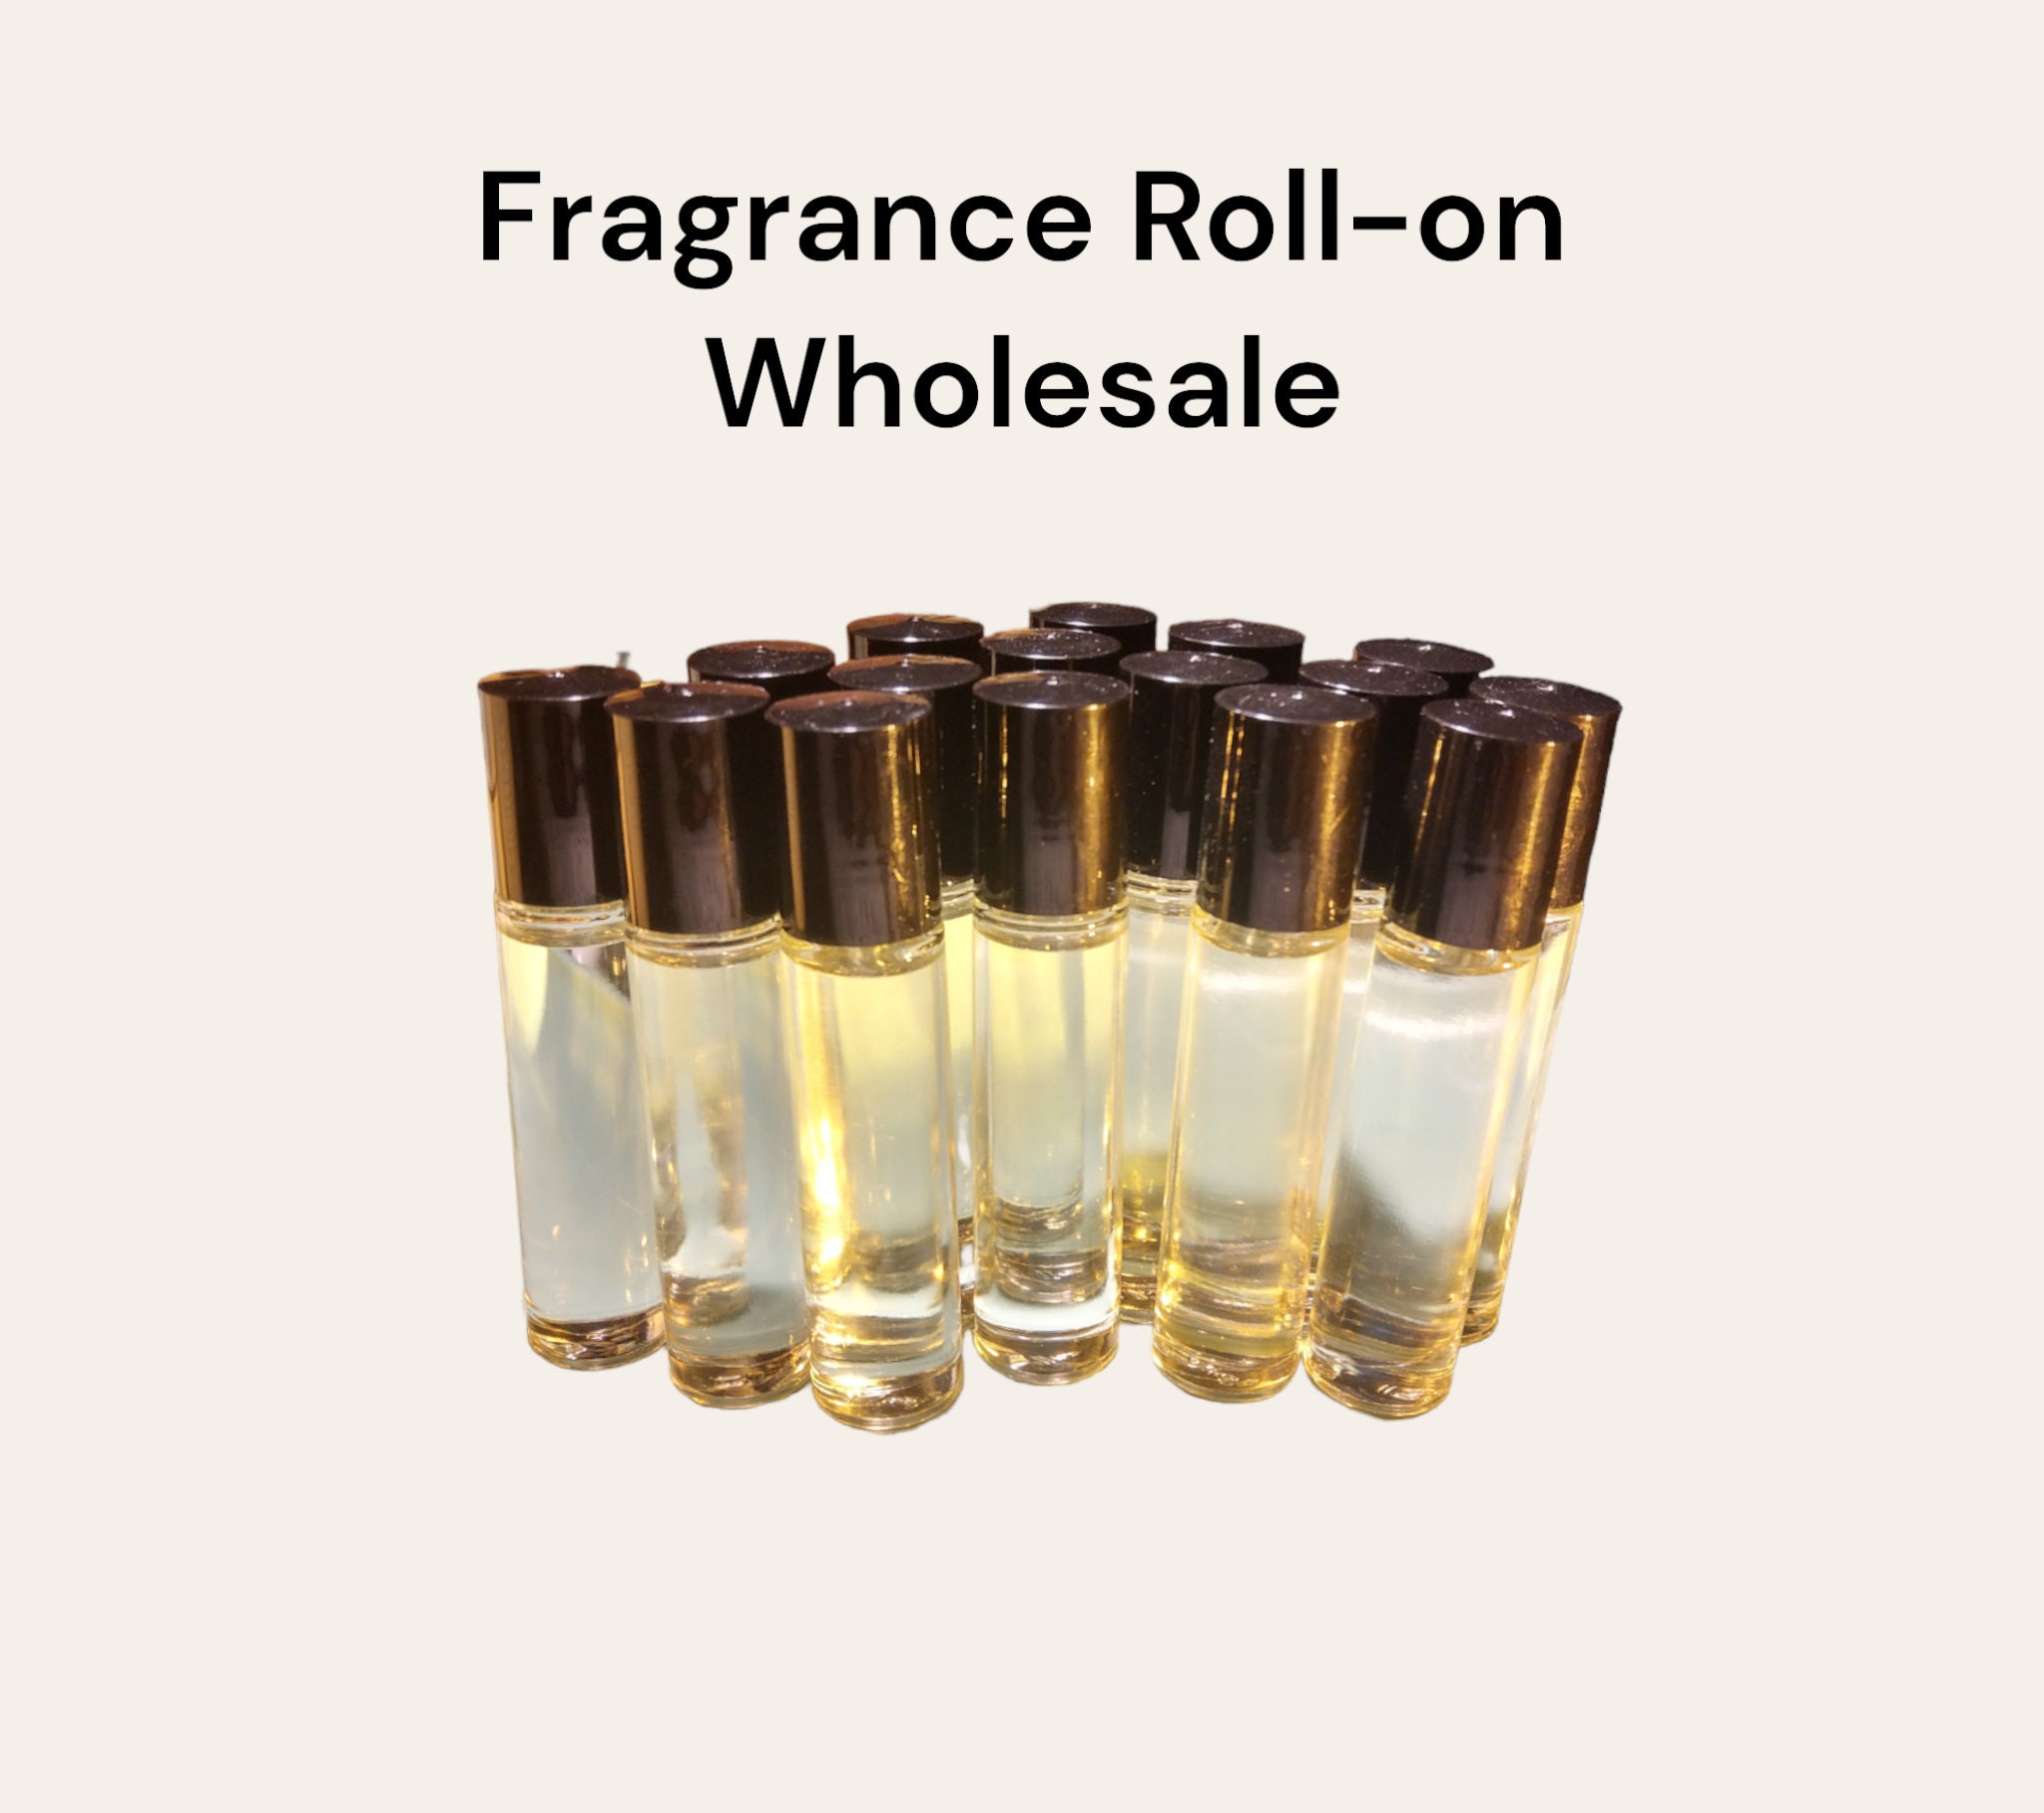 Fragrance Oil Scented Oils For Soap Making, Body Butters, Candle Making,  Lotion, Wholesale, Bulk, Perfume, Diffuser, Buy 3 Get 1 FREE